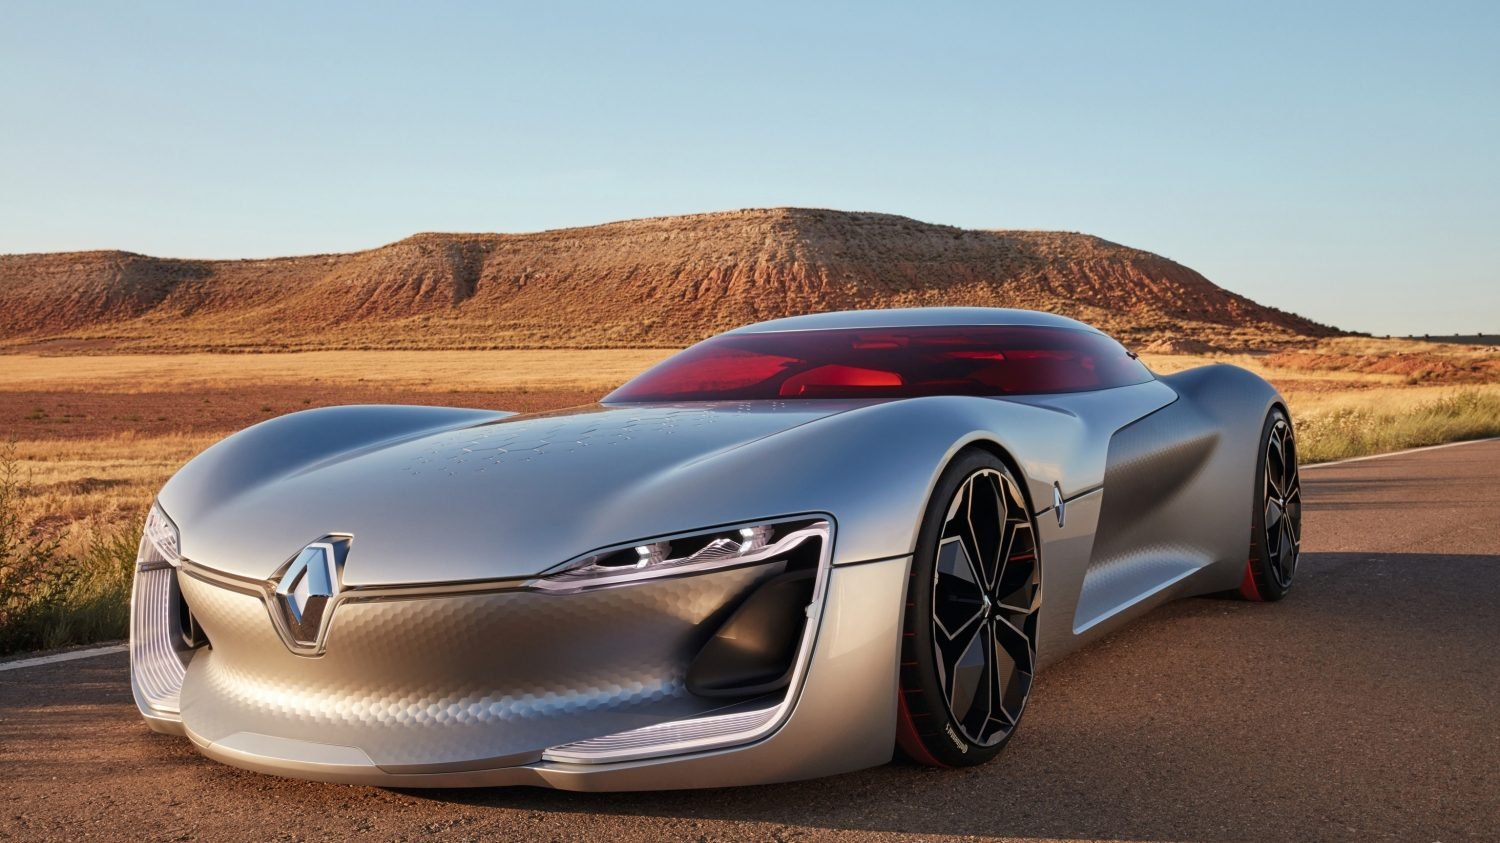 The Renault Trezor - Concept Car of the Future - SteemKR